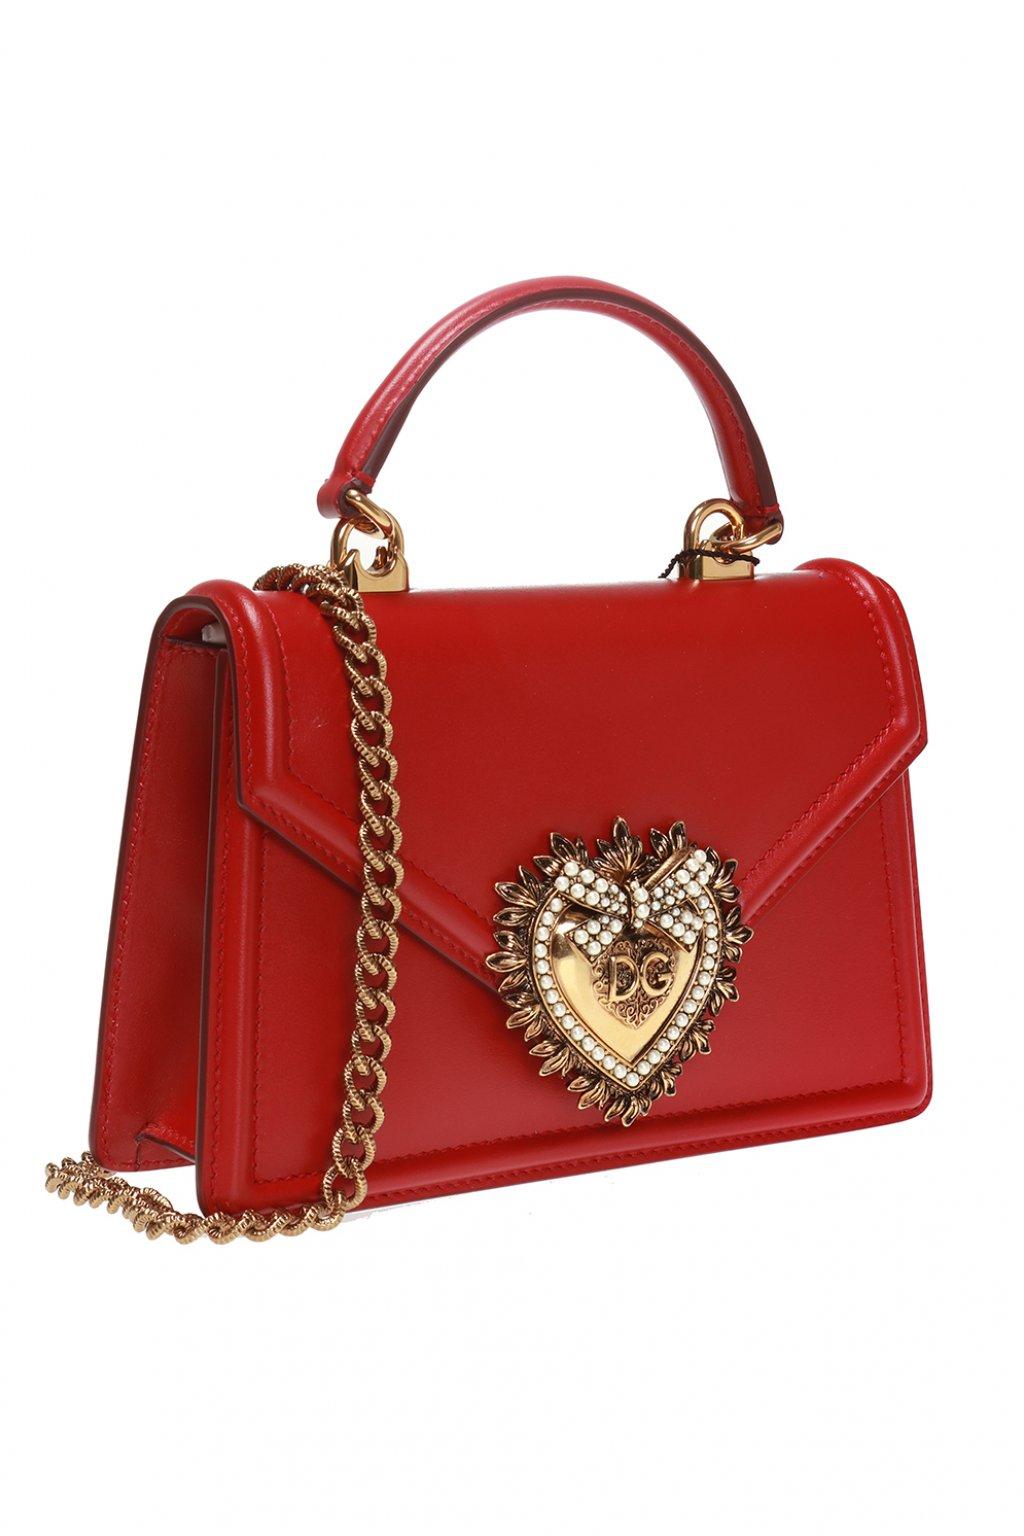 Dolce & Gabbana Leather Medium Devotion Bag in Red - Save 21% | Lyst